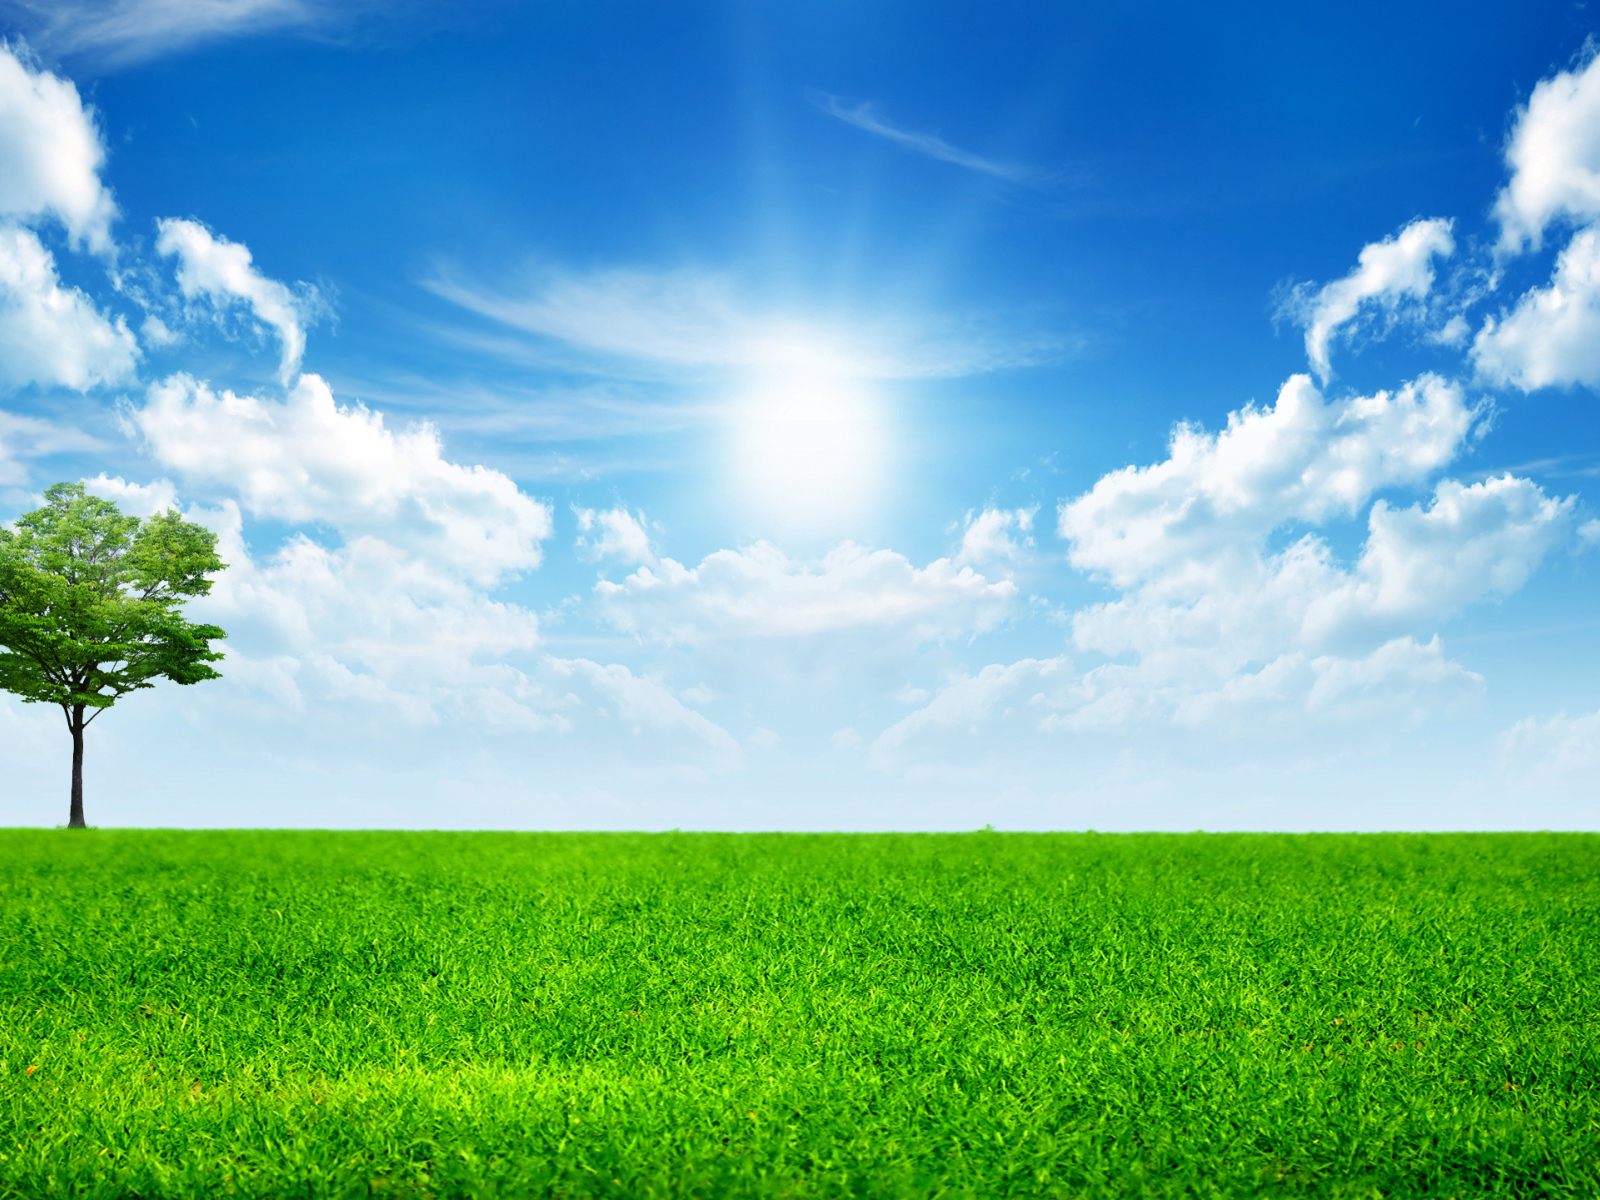 Green grass under the bright sun in the blue sky with white clouds